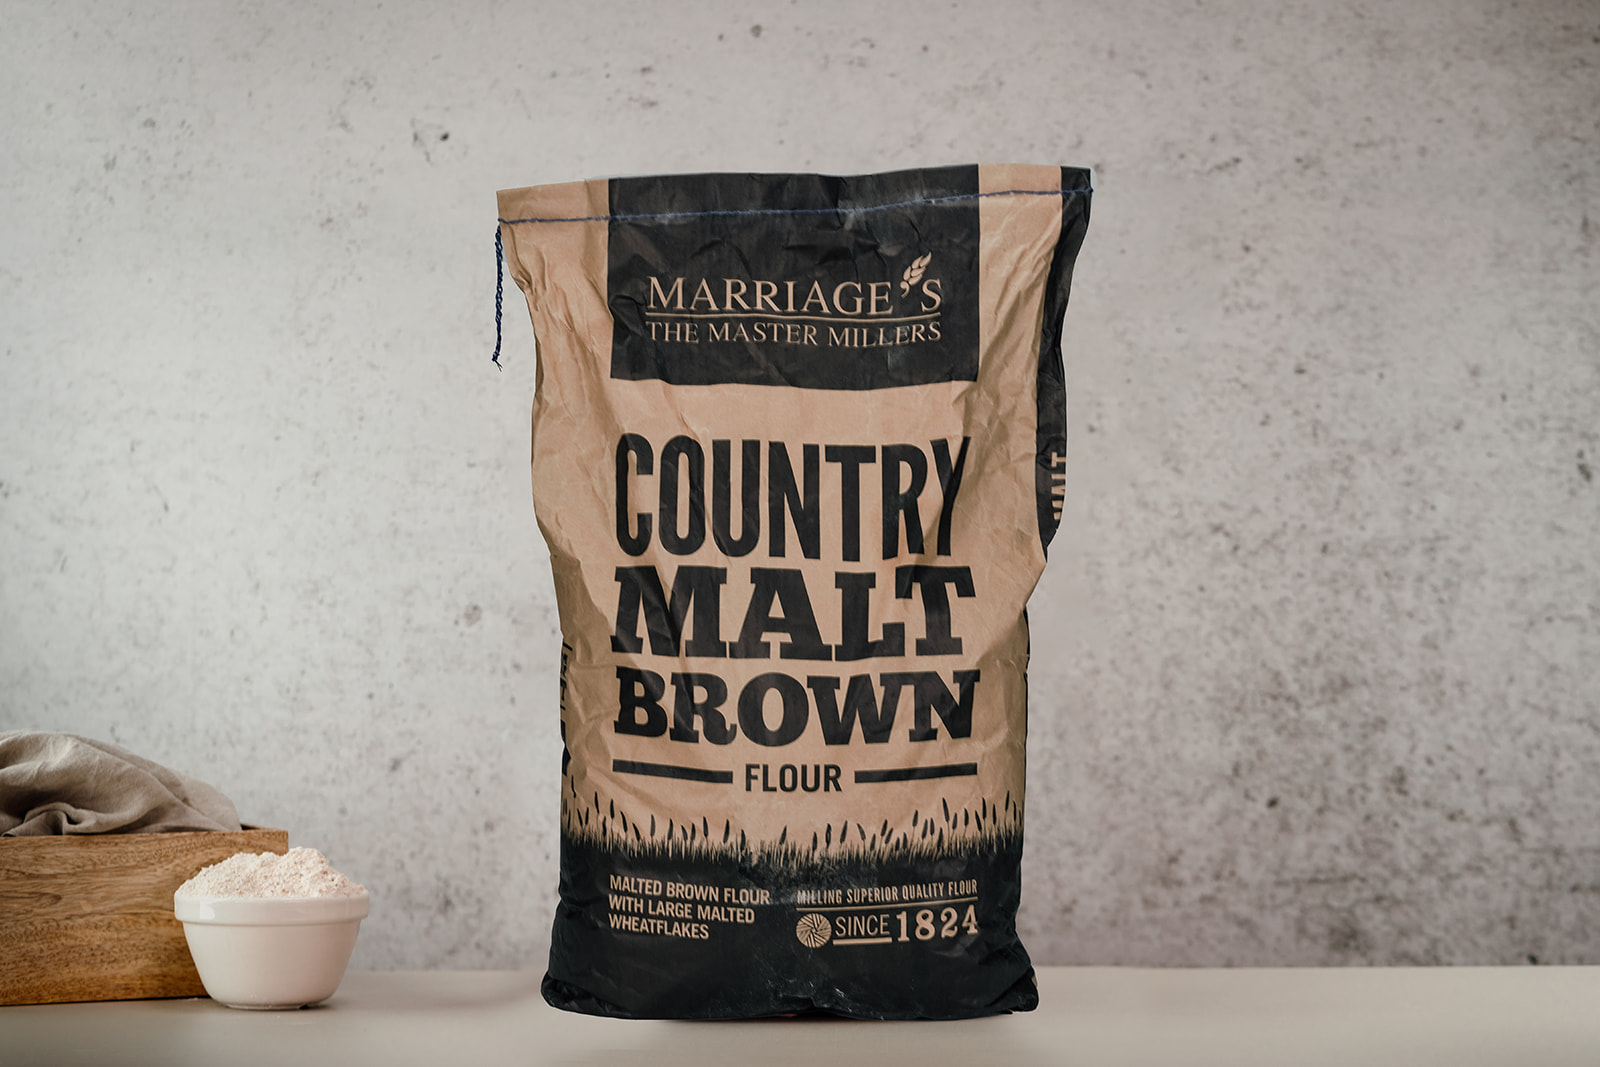 Country Malt Brown